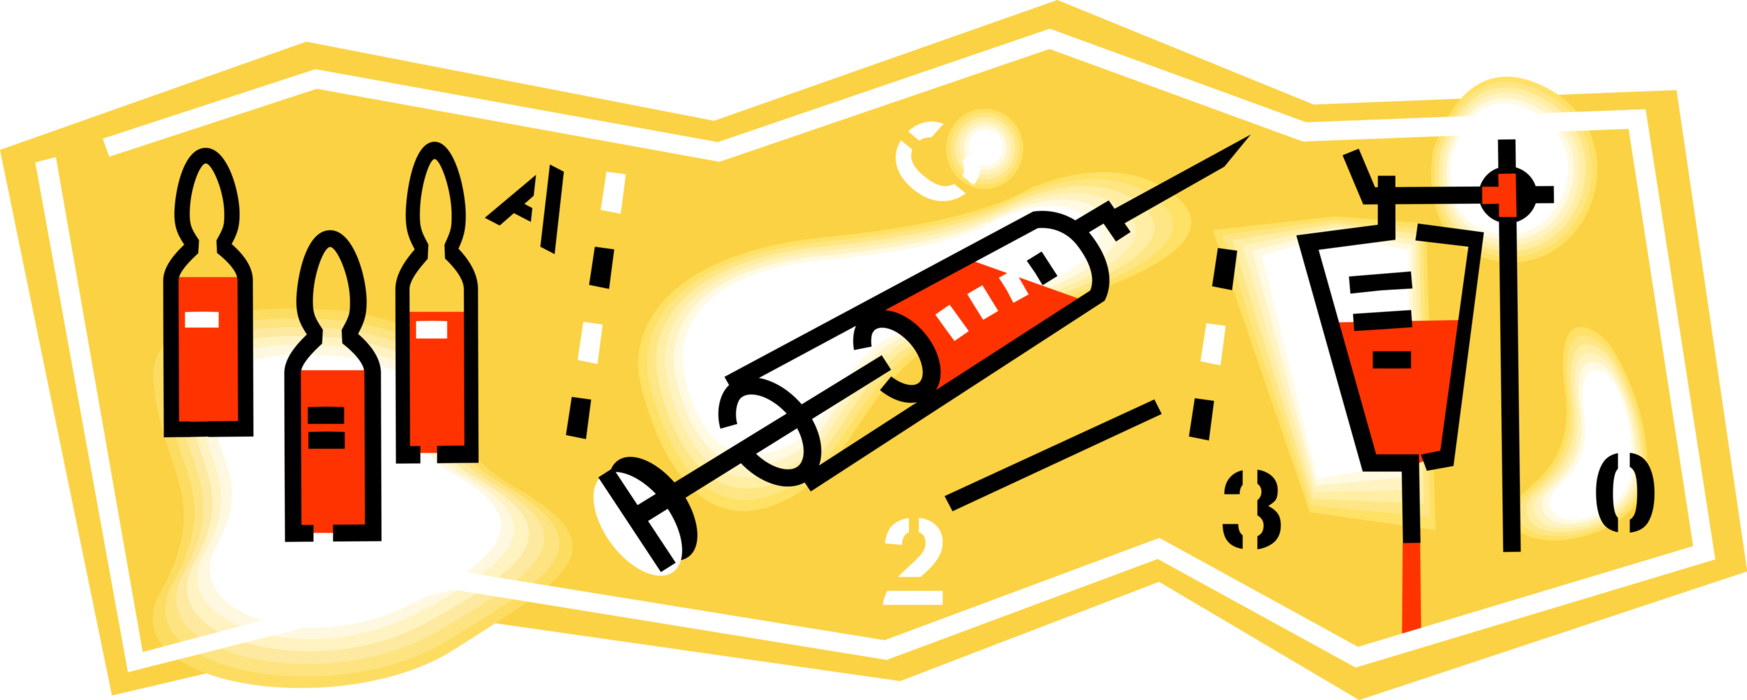 Vector Illustration of Hypodermic Syringe Needle, with Sealed Ampoule Vials and Intravenous Therapy Transfusion